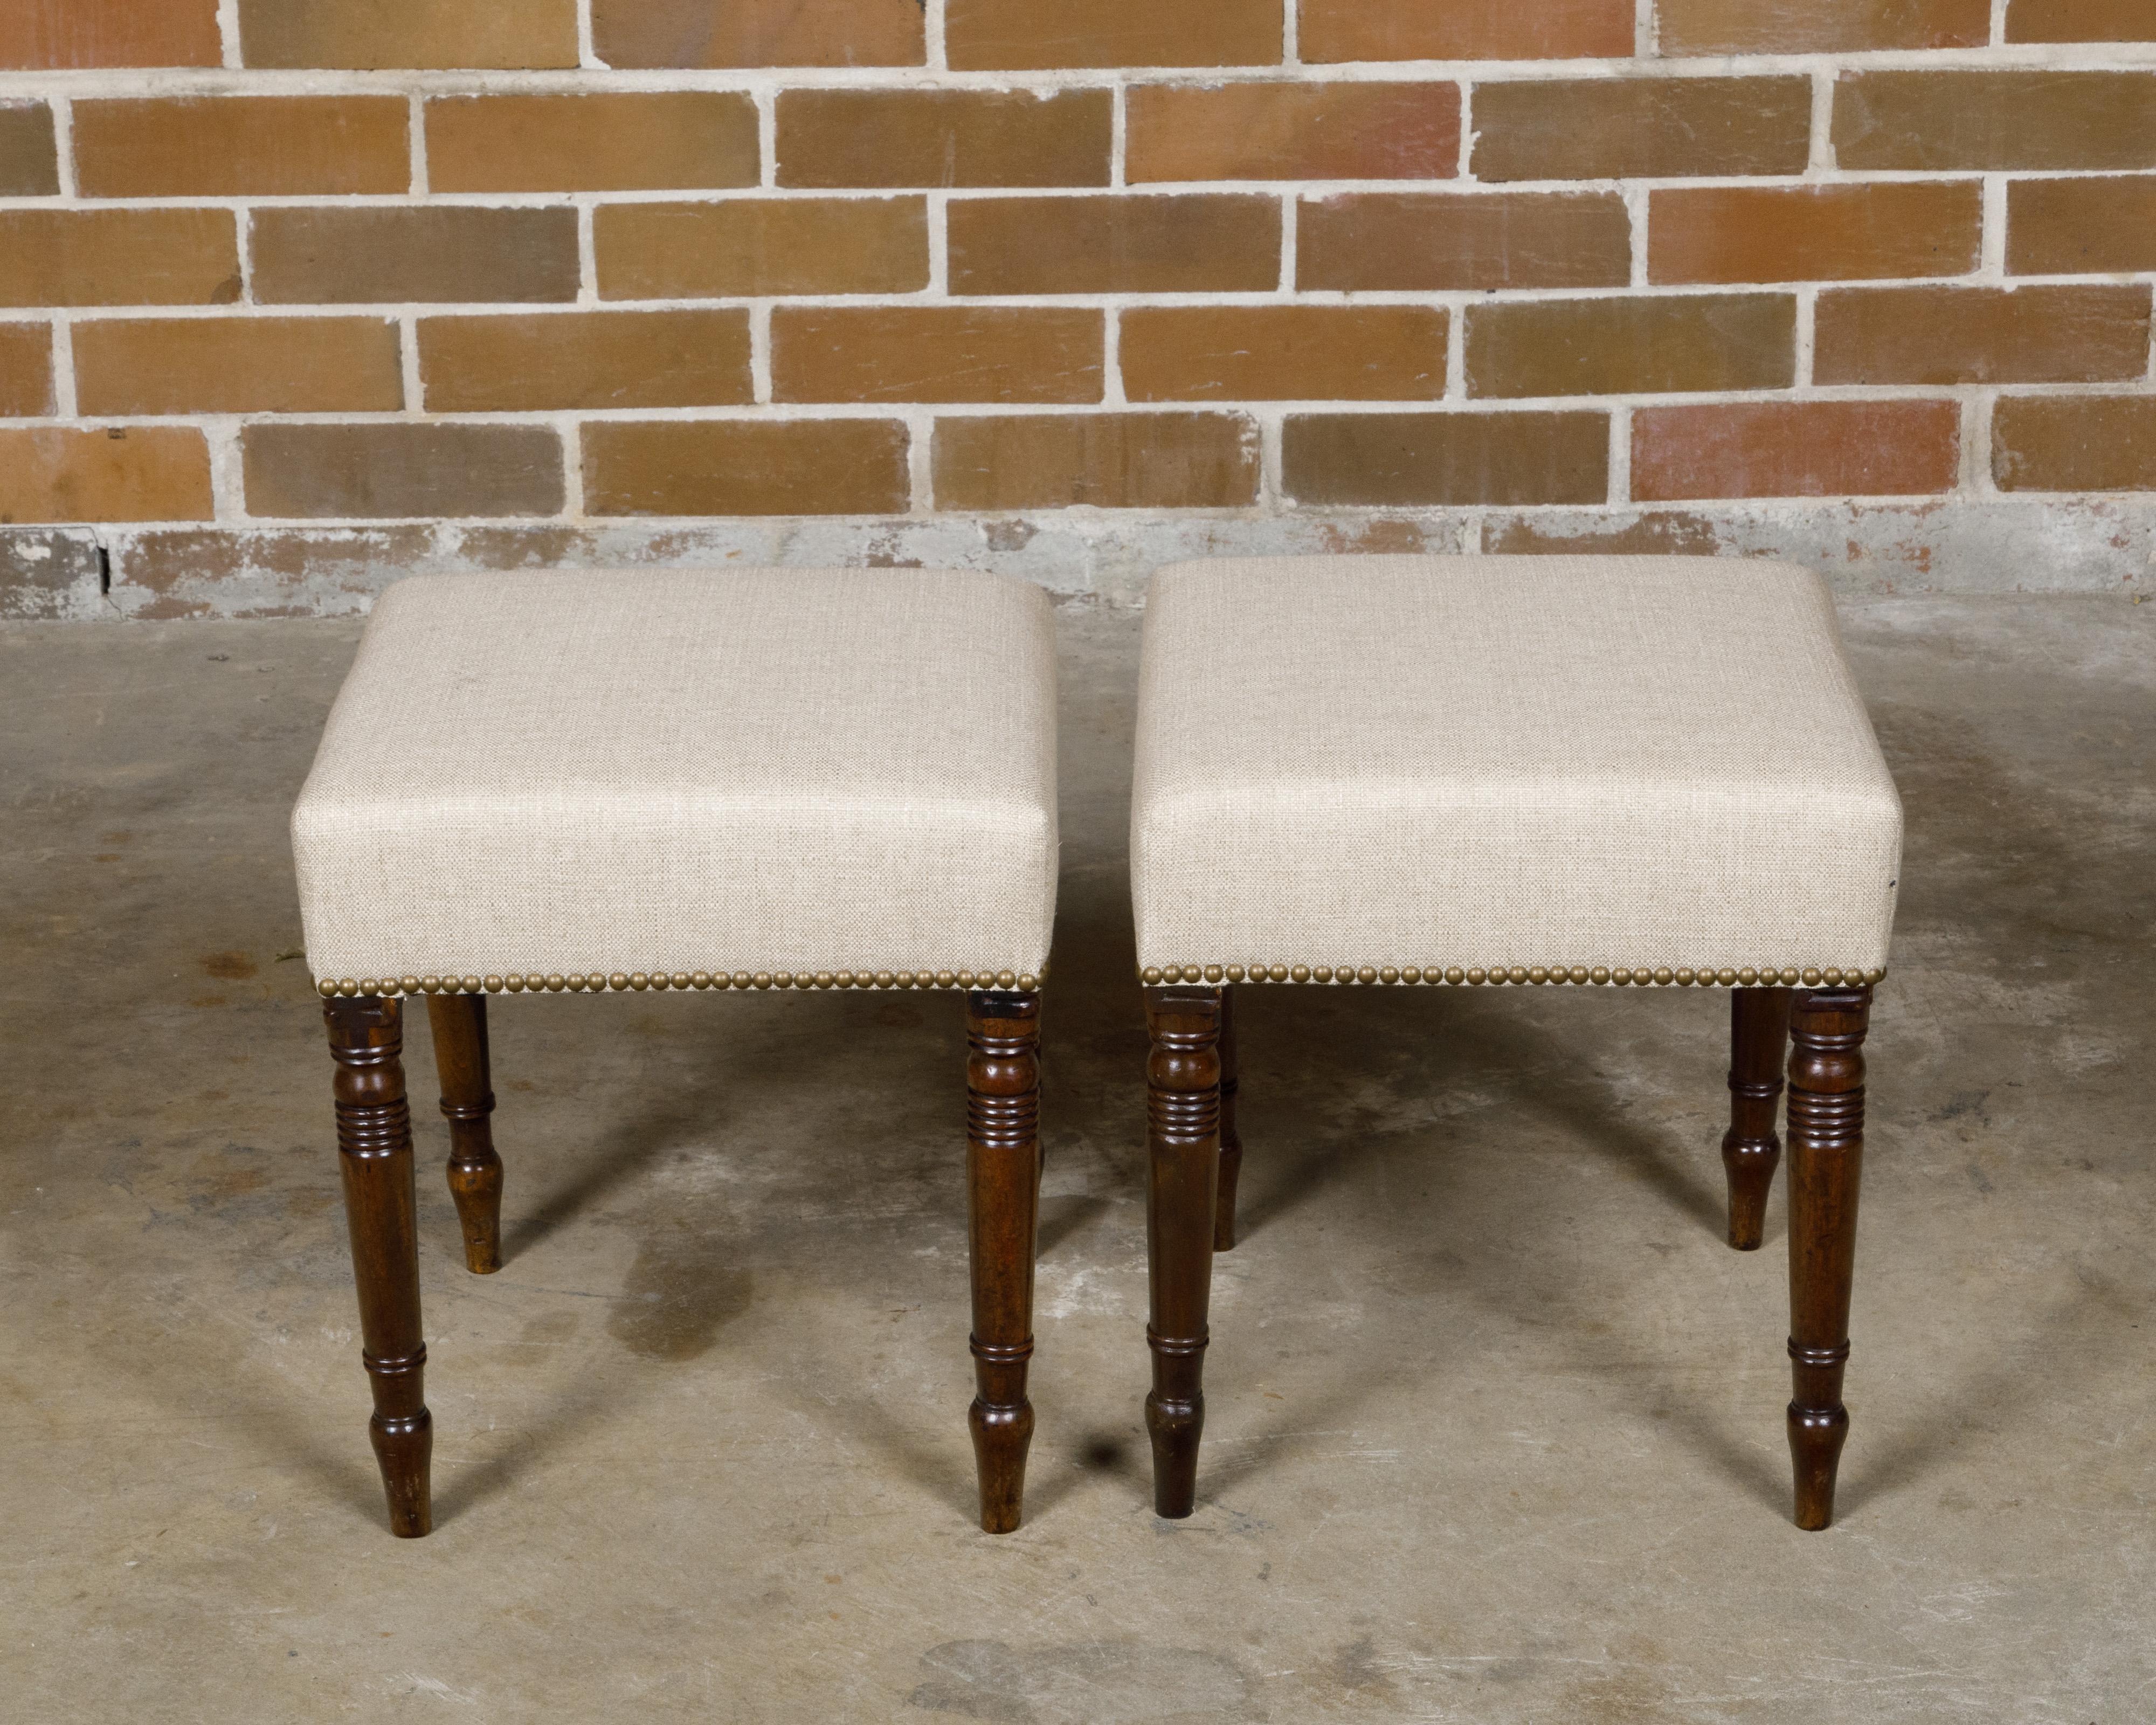 Pair of English Regency 19th Century Mahogany Stools with Turned Spindle Legs For Sale 7